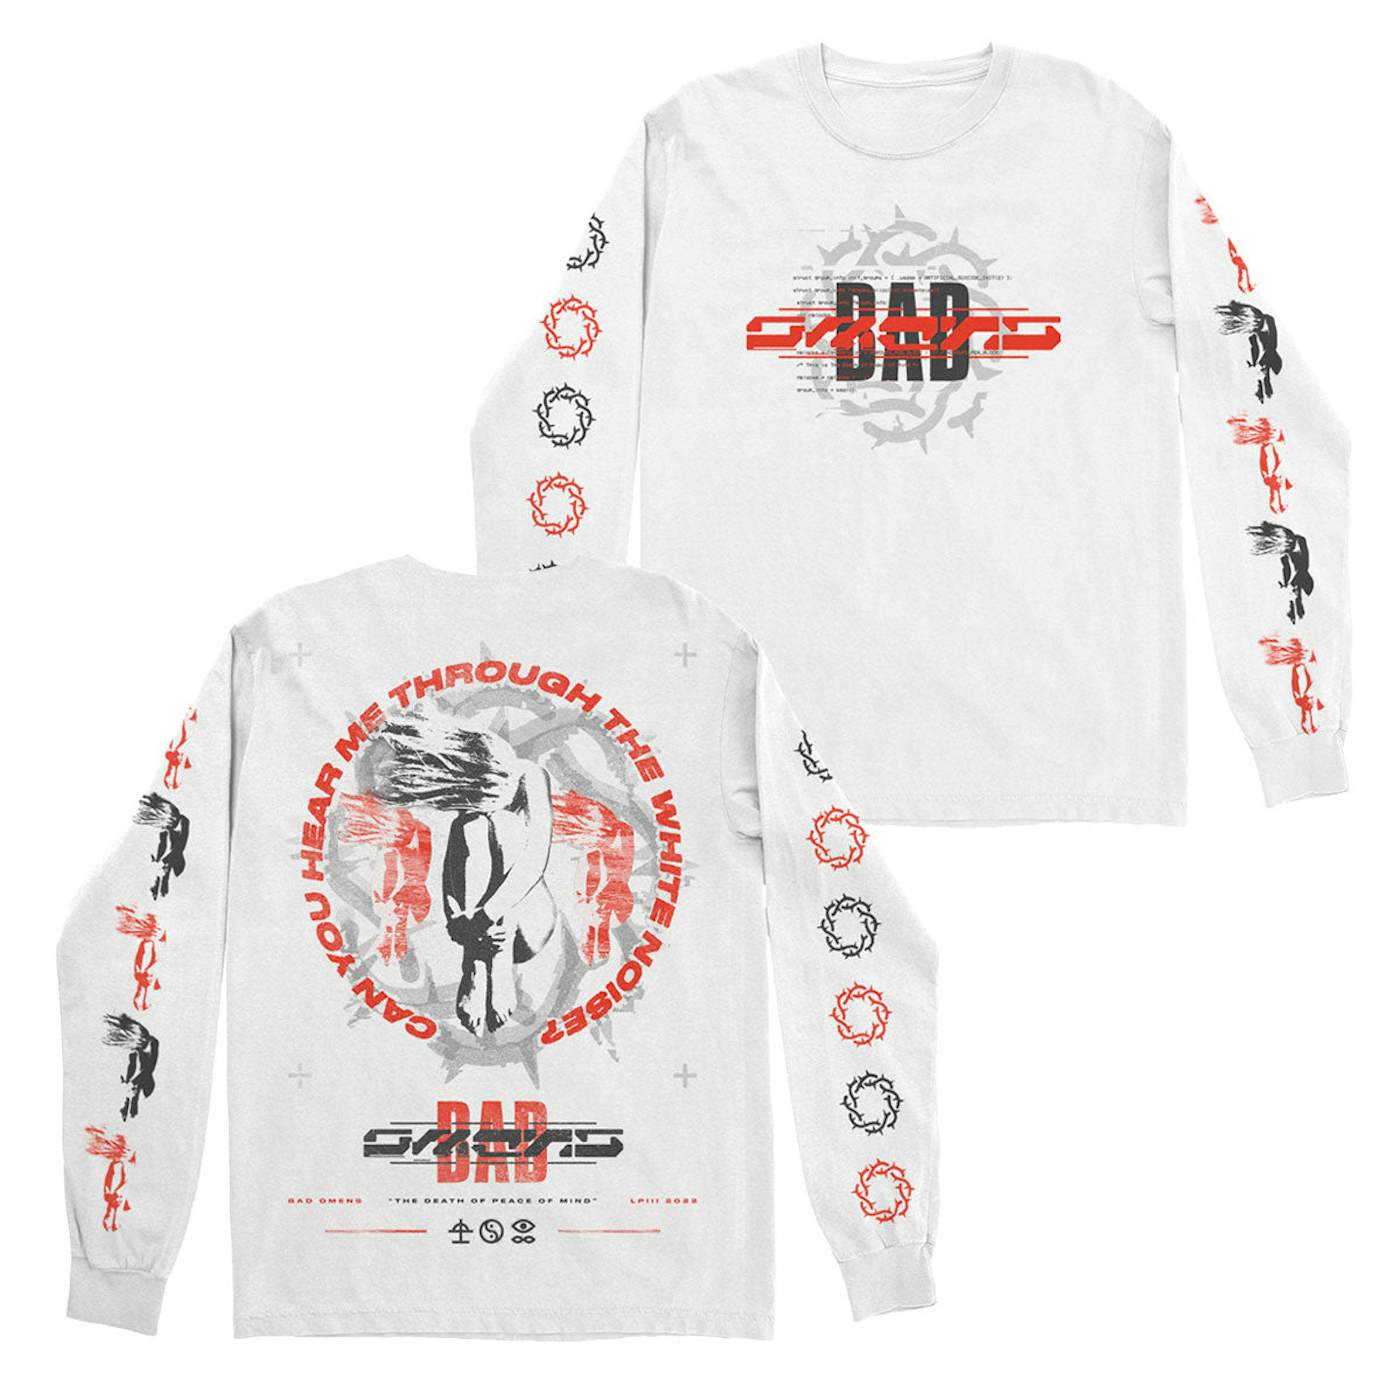 Bad Omens Merch Mask shirt, hoodie, sweater, long sleeve and tank top